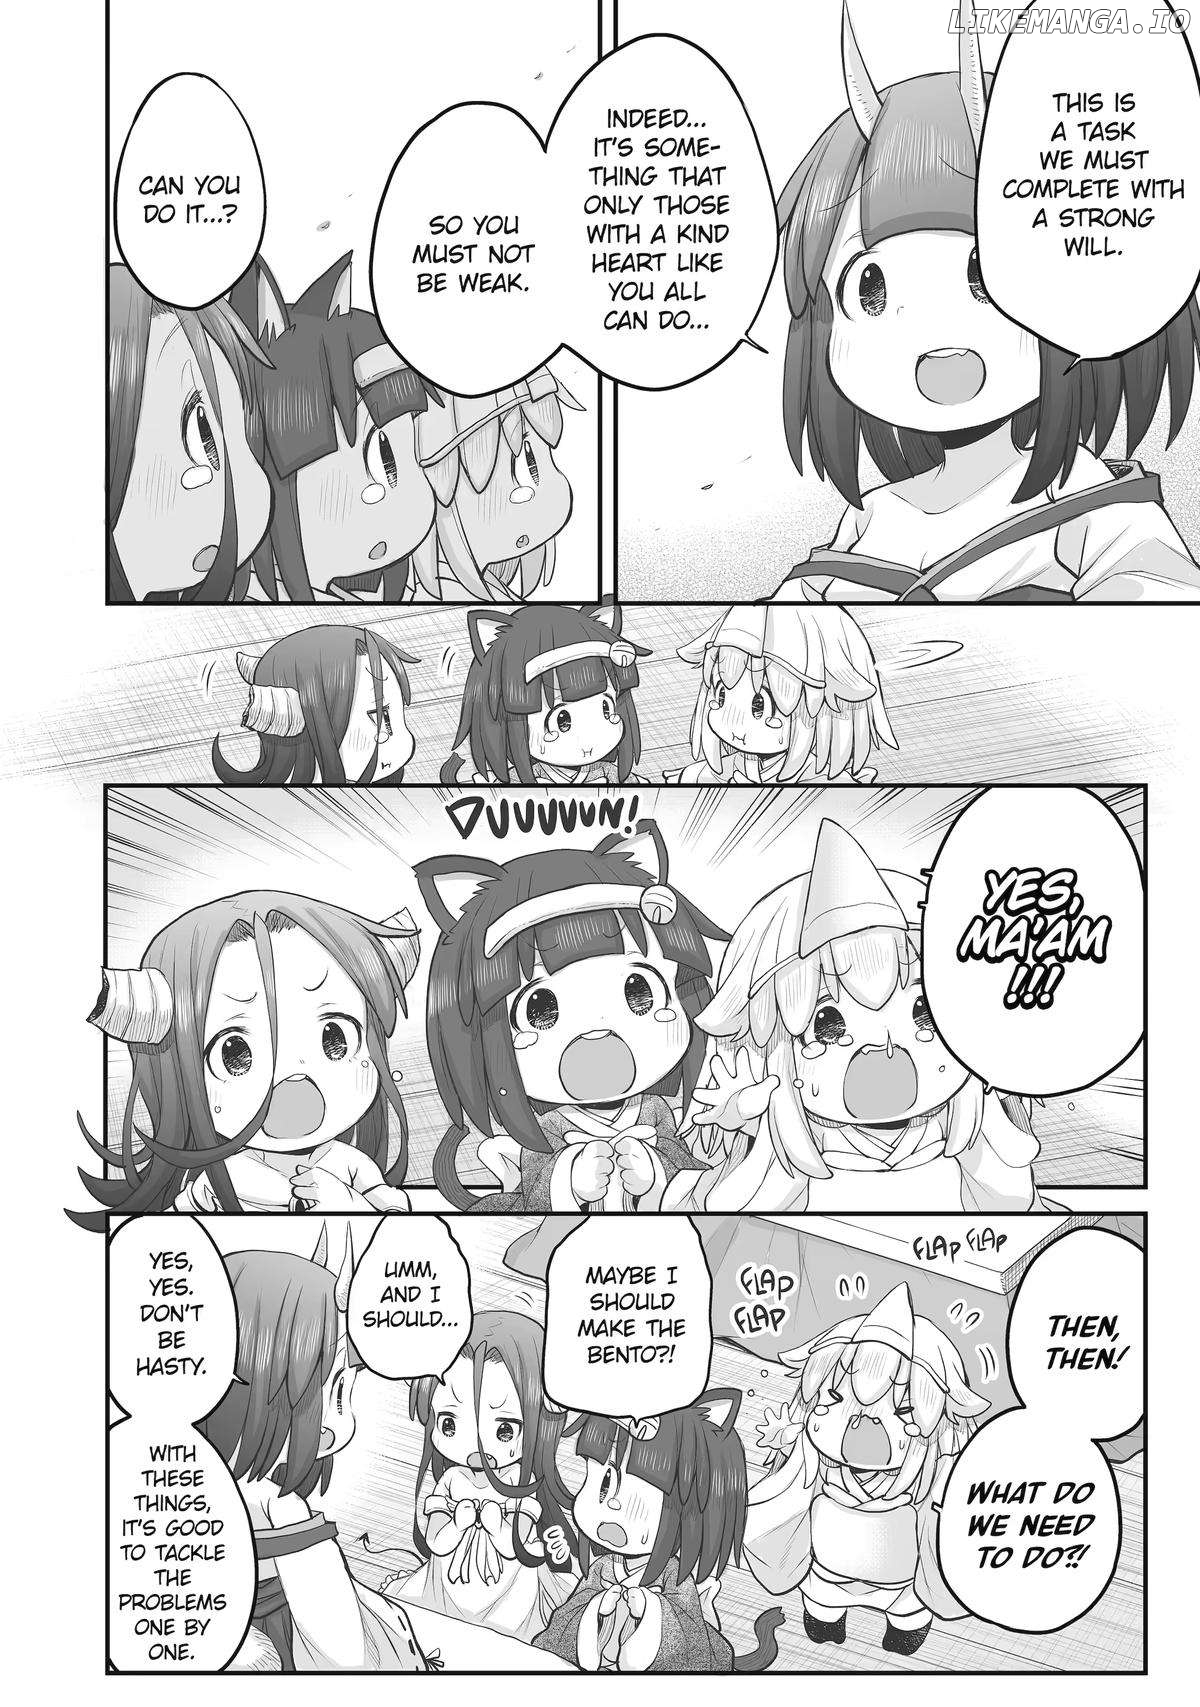 Ms. Corporate Slave Wants to be Healed by a Loli Spirit - chapter 104 - #6